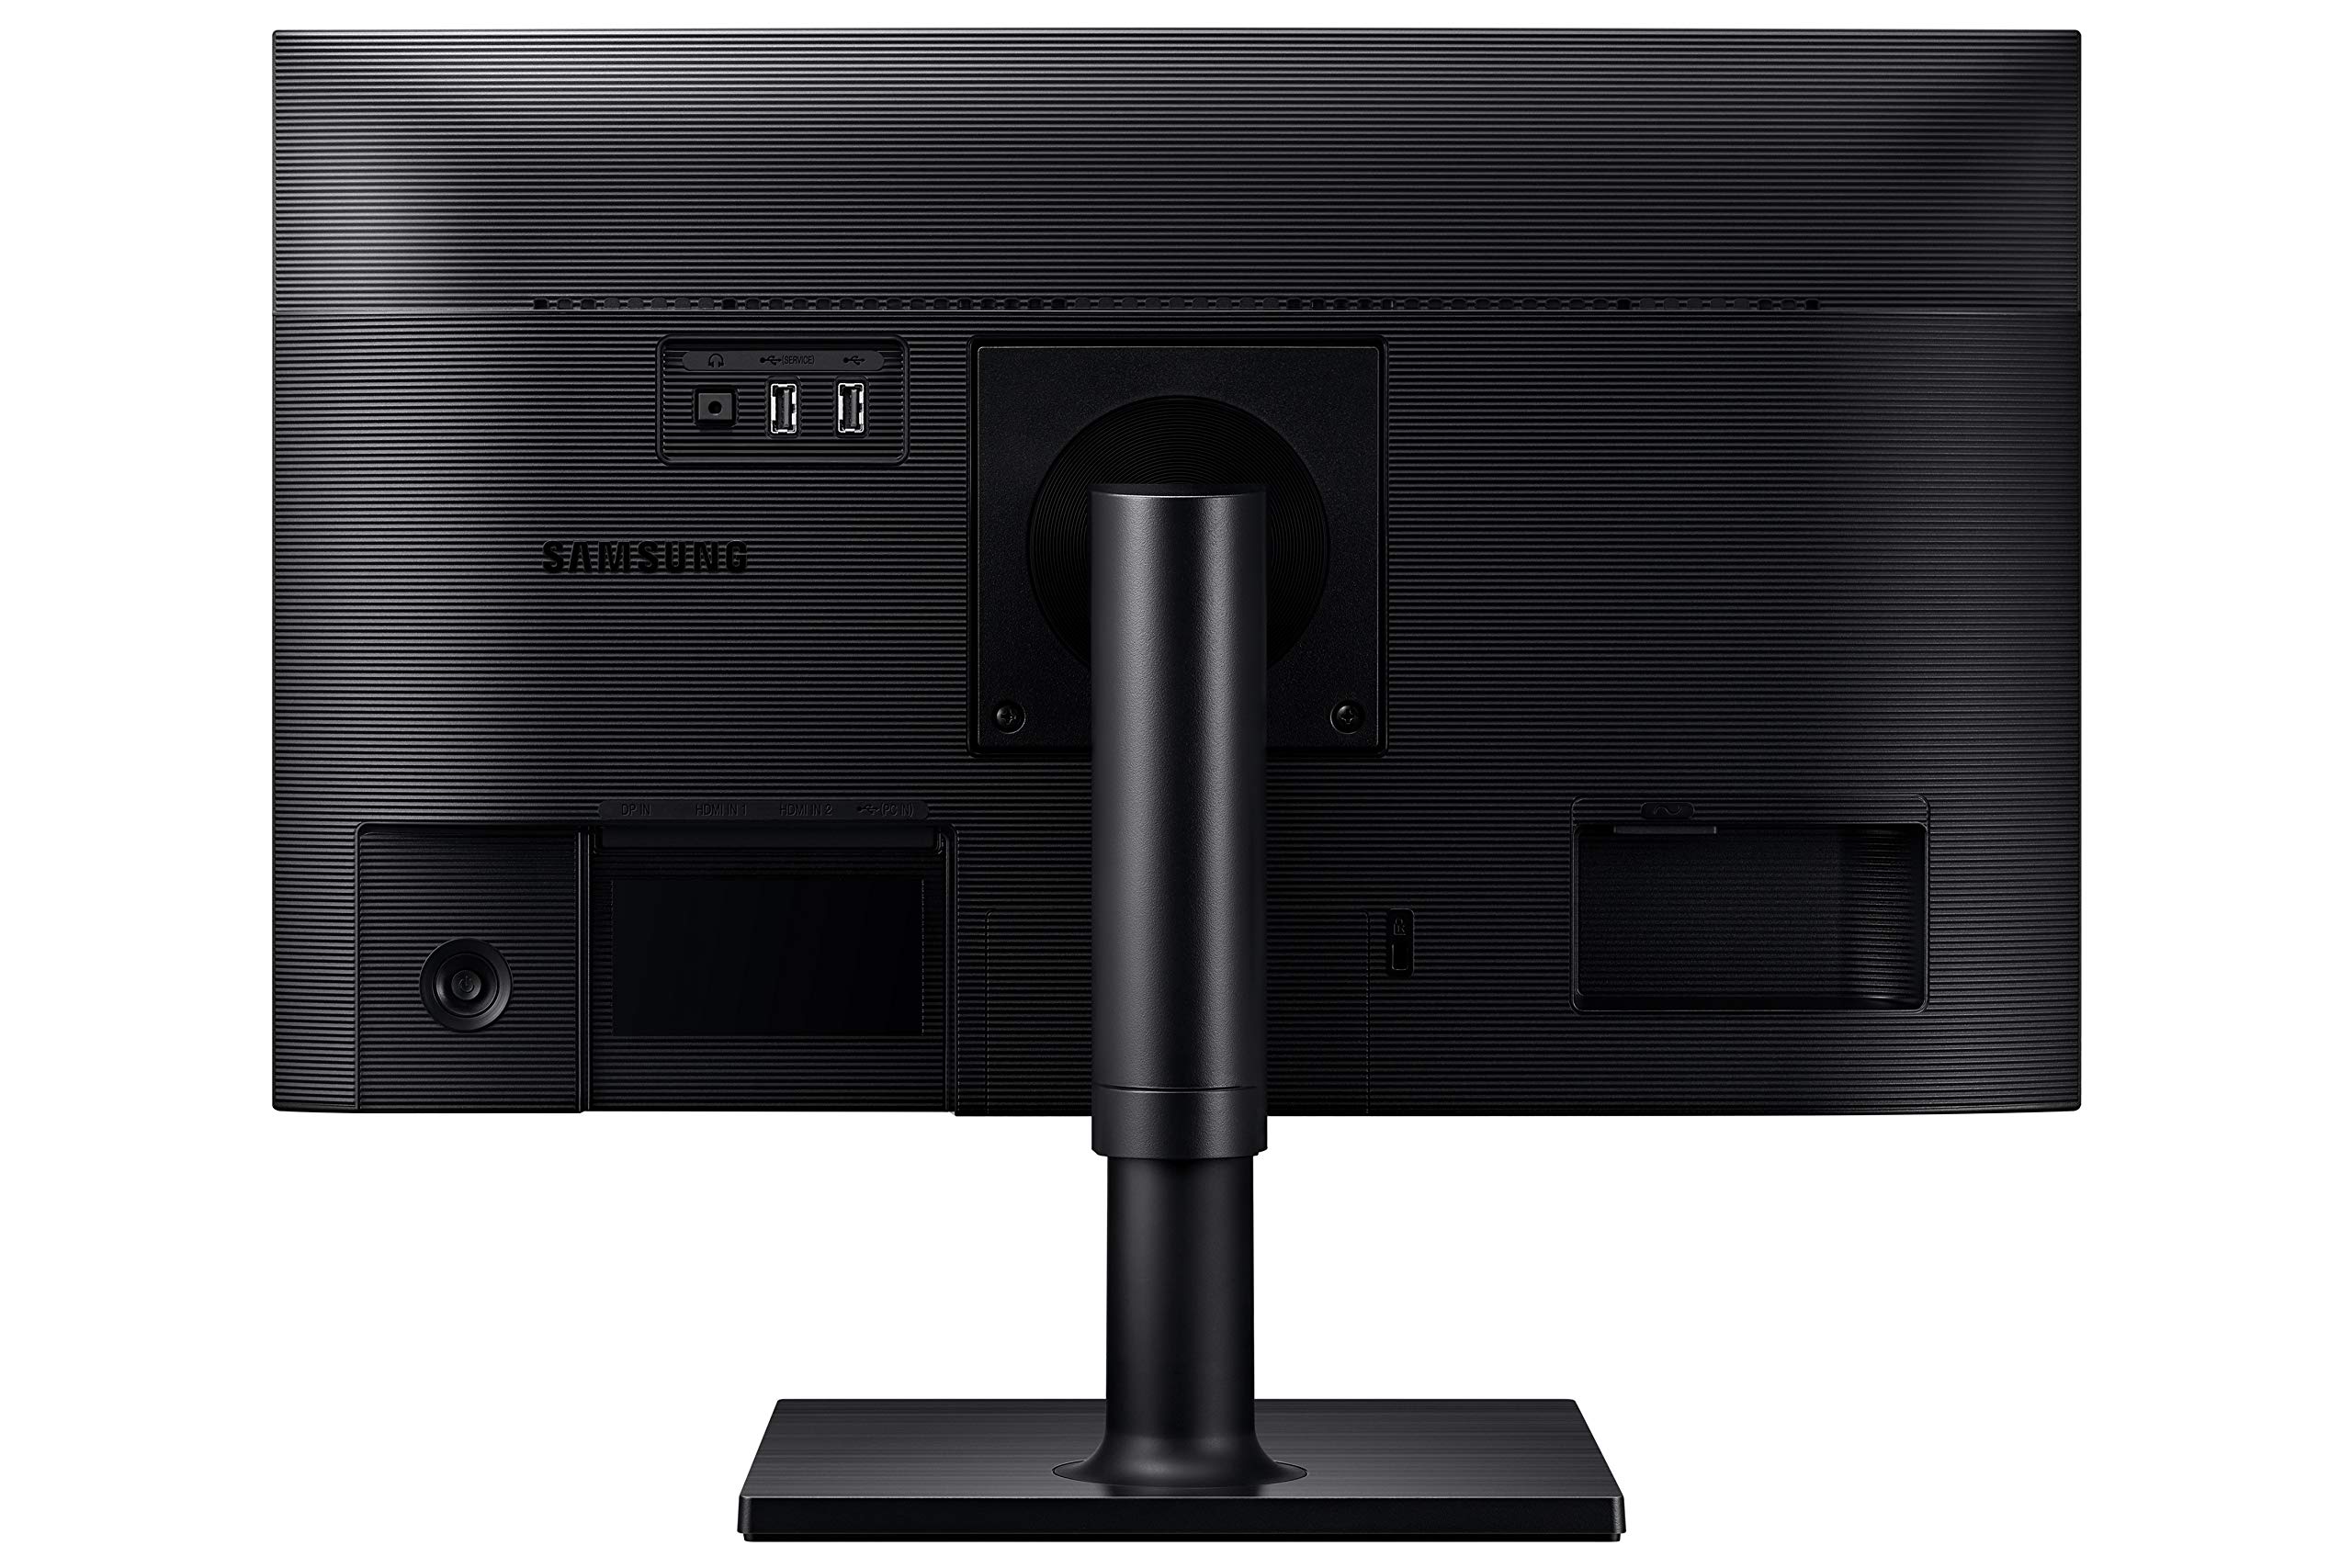 Samsung Business FT452 Series 22 inch 1080p 75Hz IPS Computer Monitor for Business with HDMI, DisplayPort, USB, HAS Stand (F22T452FQN) Black